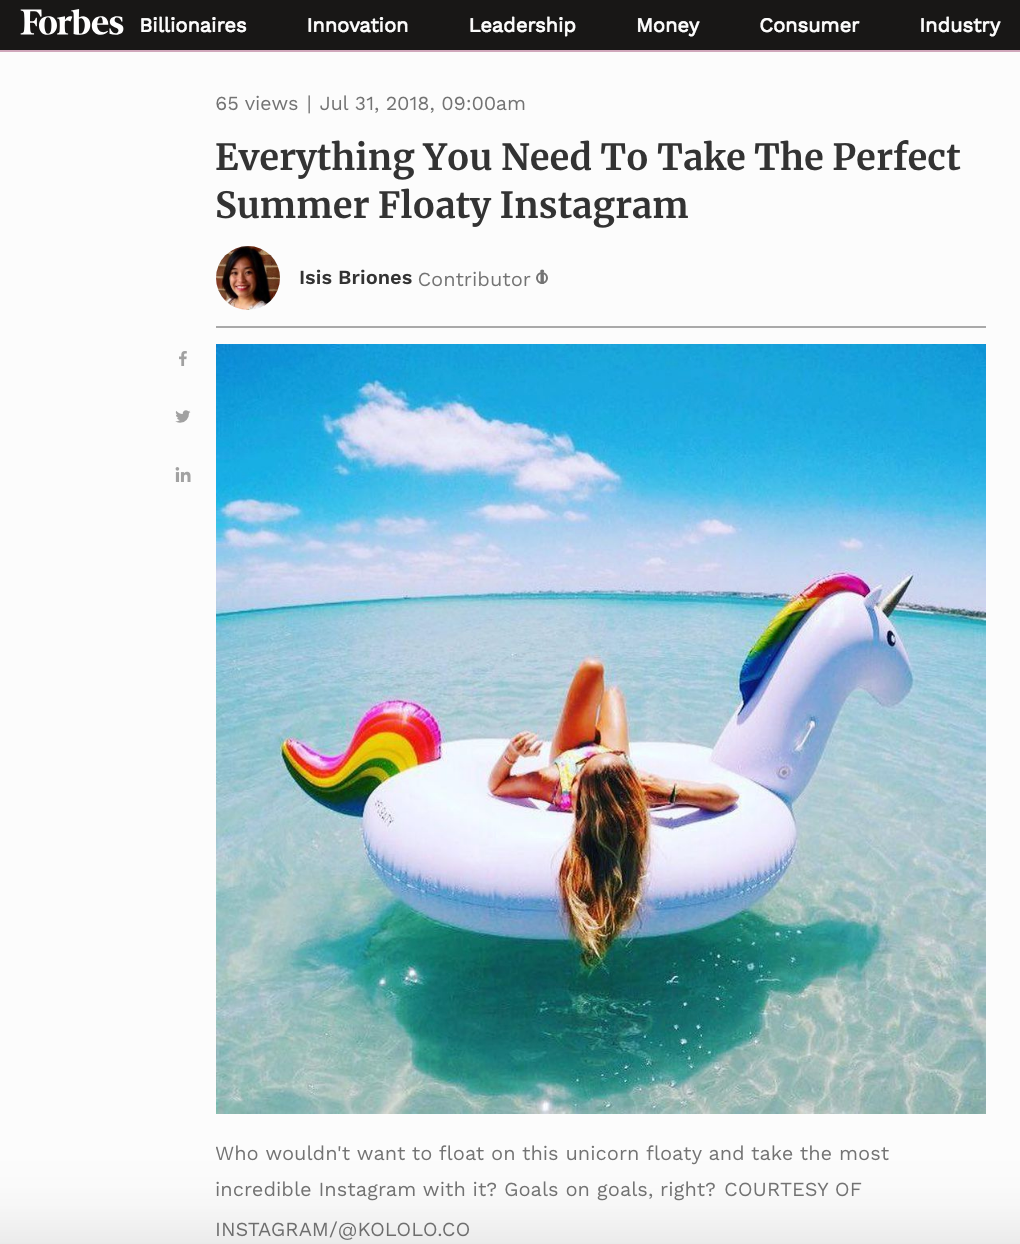 Forbes: Everything You Need to Take the Perfect Summer Floaty Instagram